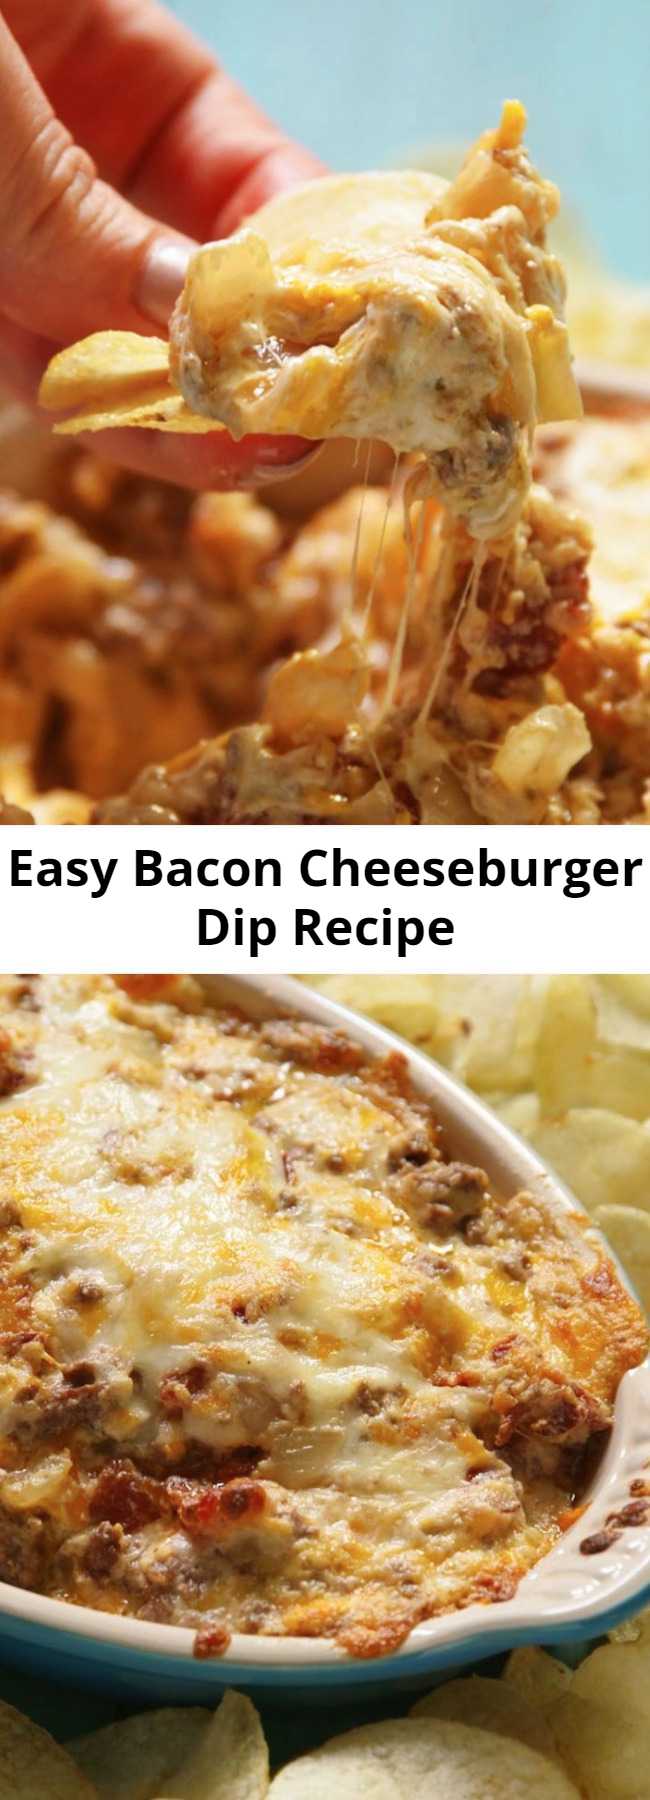 Easy Bacon Cheeseburger Dip Recipe - Obsessed with burgers? Us, too. This easy and super cheesy dip is loaded with ground beef, onion, Worcestershire sauce. And we dip chips in it because this is America and we can do what we want.